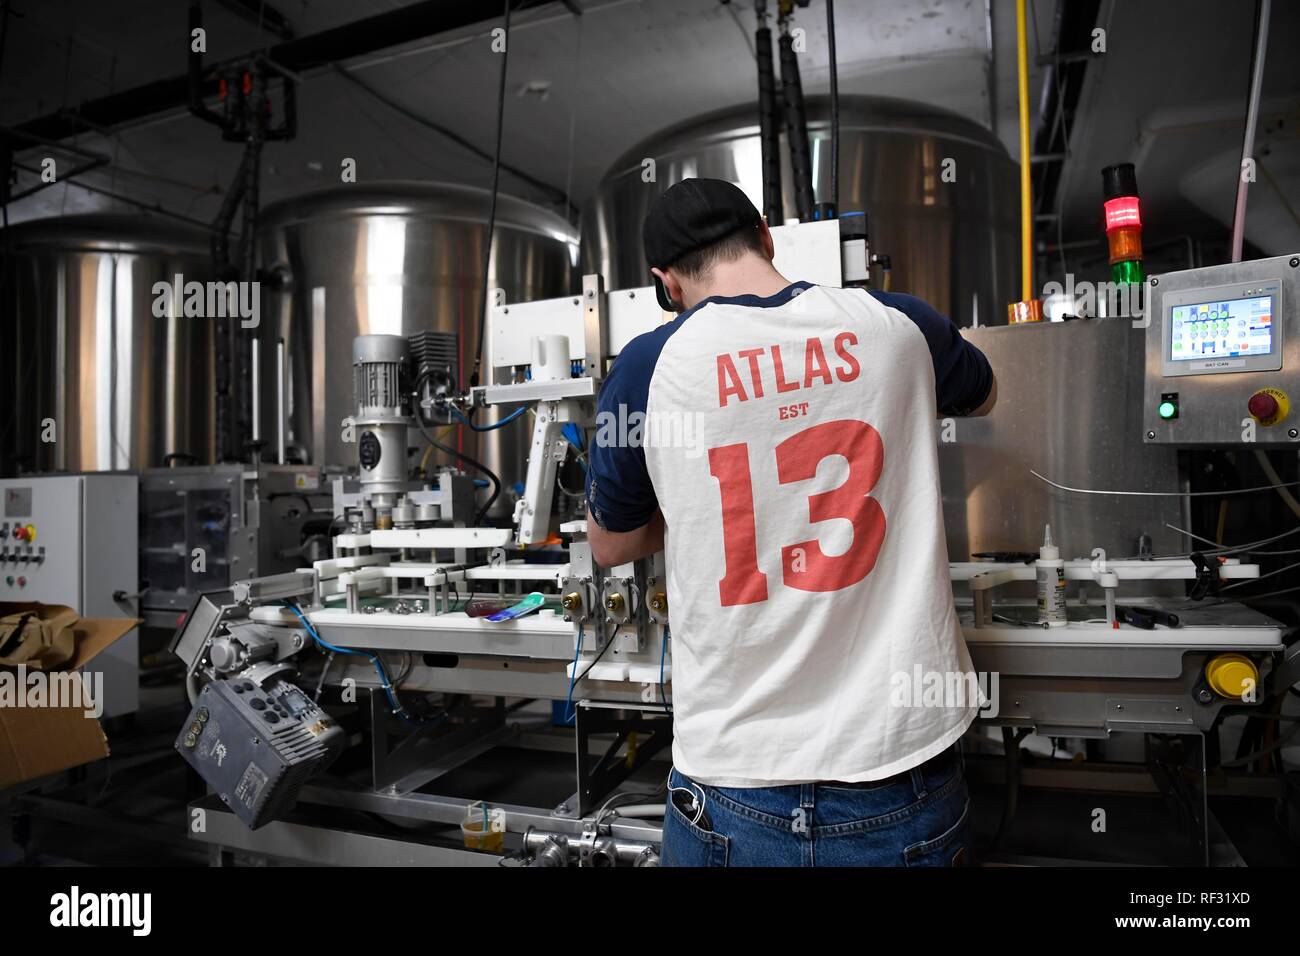 (190123) -- WASHINGTON, Jan. 23, 2019 (Xinhua) -- A staff works at Justin Cox's brewery in Ivy City in northeastern Washington, DC, the United States, Jan. 17, 2019. Located in the community of Ivy City in northeastern Washington, DC, Justin Cox's 12-feet-tall (around 3.66 meters tall) brewery has 14 production tanks, with a strong hop aroma filling the air. His craft brewing business has been running smoothly for over five years until just recently. Without approved labels from the federal government, kegs of apricot-flavored India Pale Ale (IPA) have piled up in his warehouse, unable to be Stock Photo